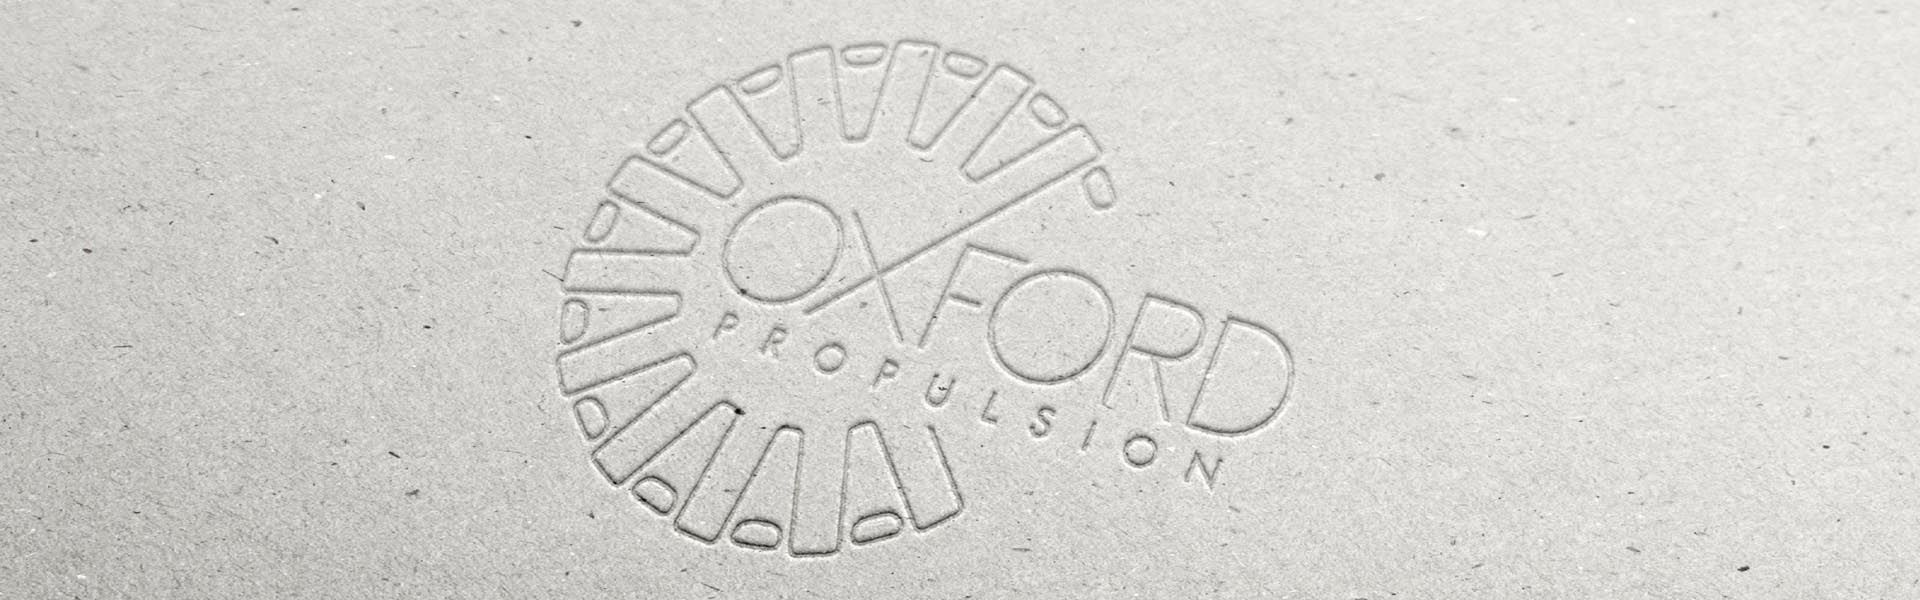 a logo for oxford propulsion is embossed into a piece of cardboard